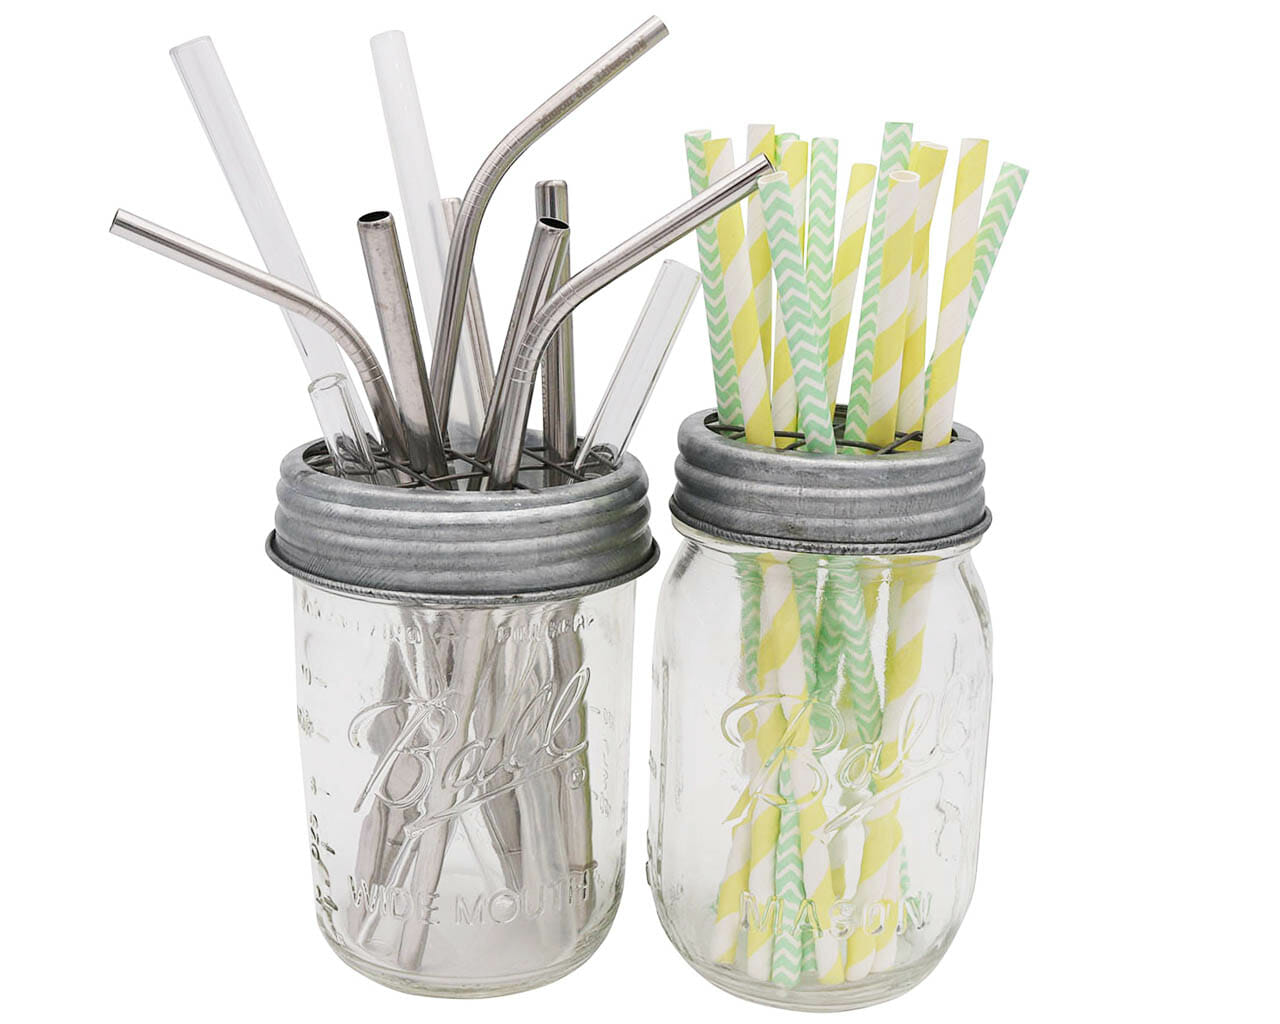 Galvanized metal frog flower organizer lids for regular and wide mouth Mason jars